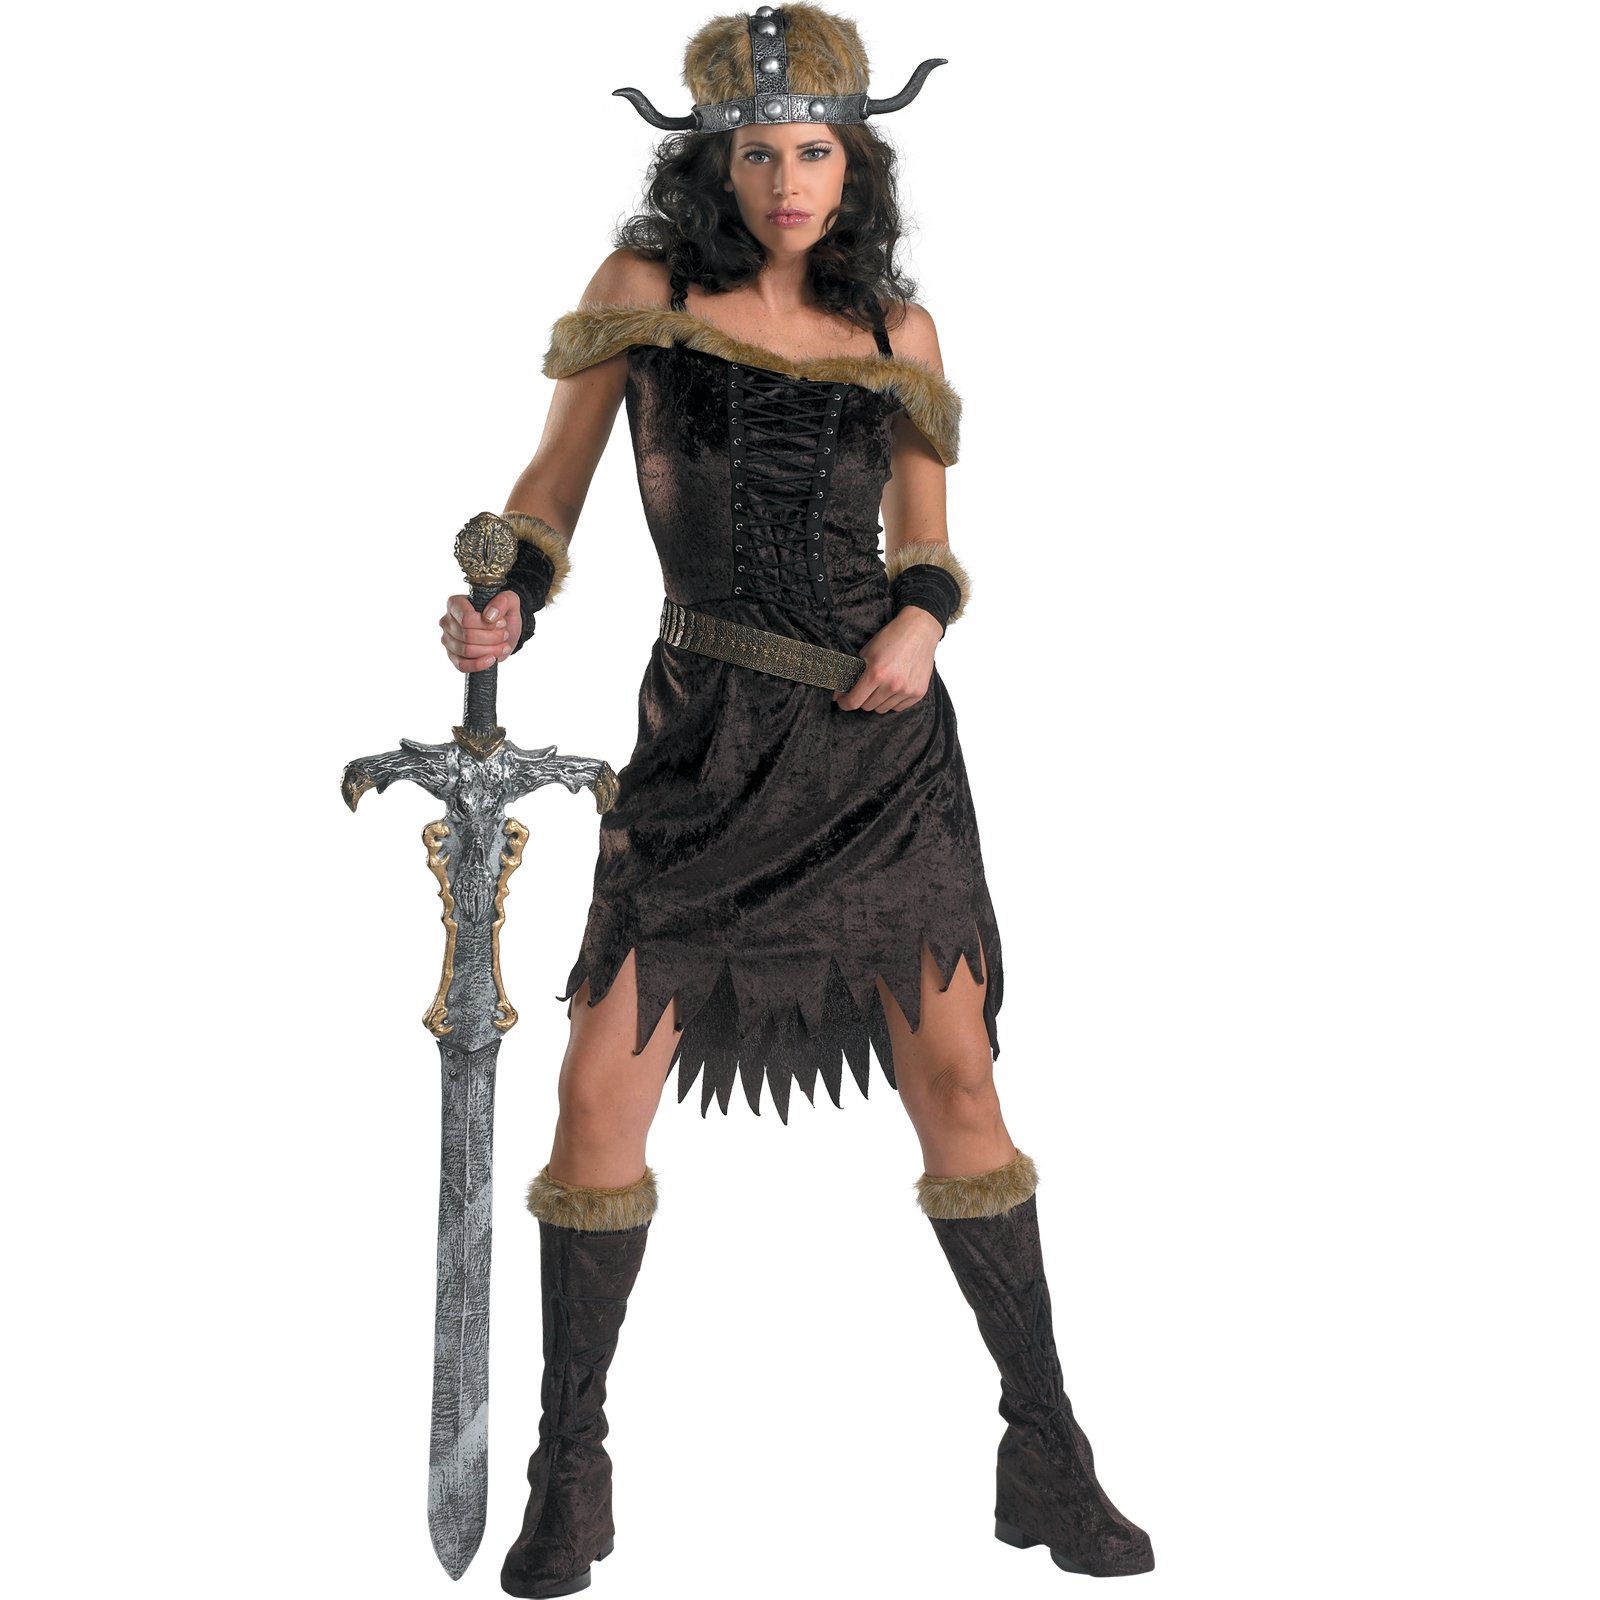 Nordic Babe Adult Costume - Click Image to Close